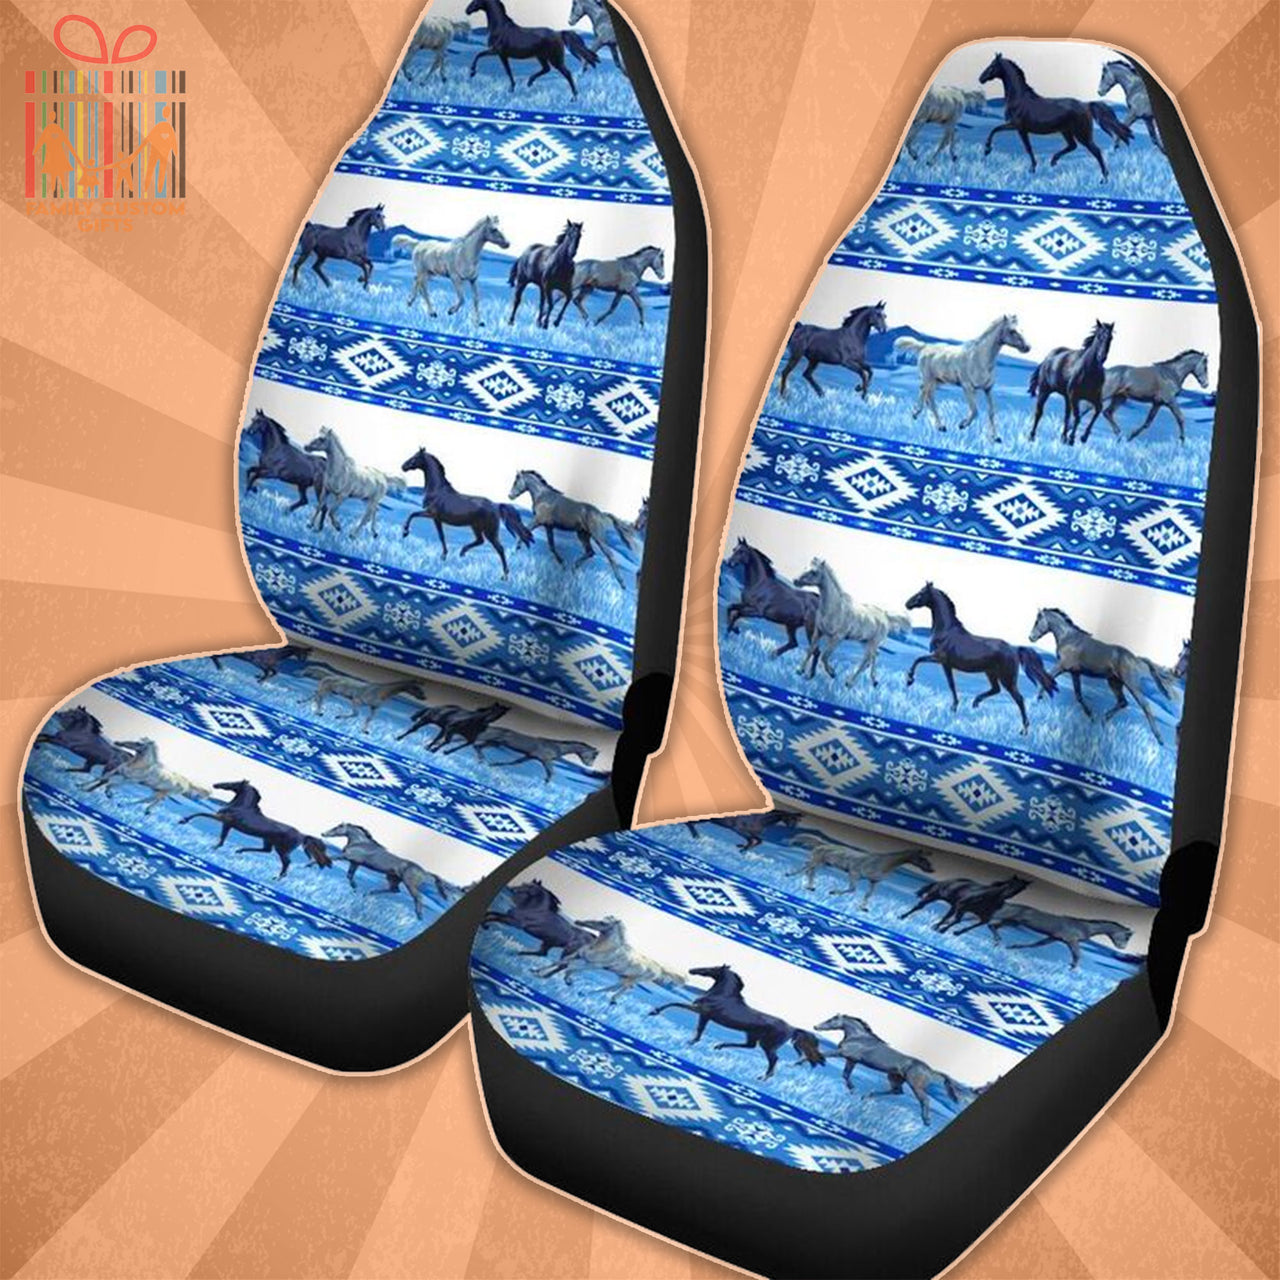 Custom Car Seat Cover Blue Horse Pattern Seat Covers for Cars